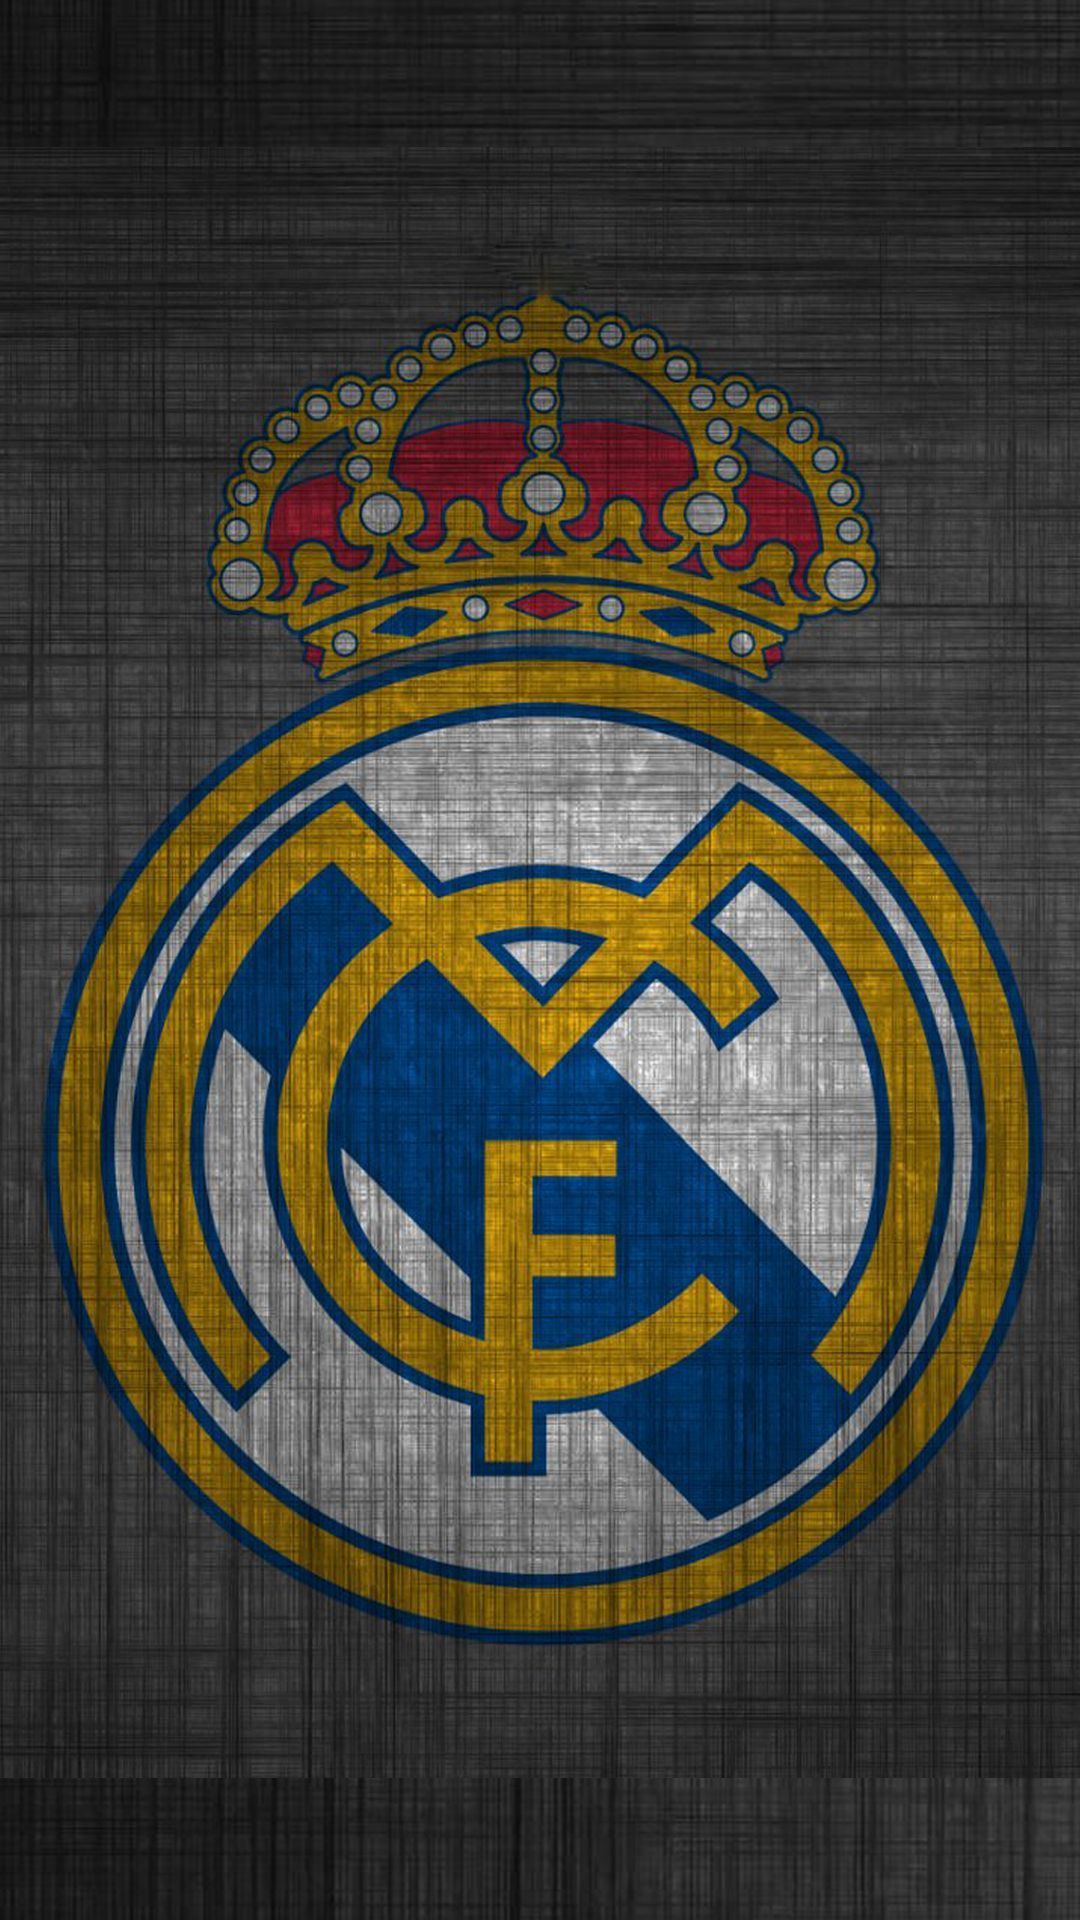 Champions League Real Madrid Wallpaper Home Screen. Madrid wallpaper, Real madrid wallpaper, Real madrid